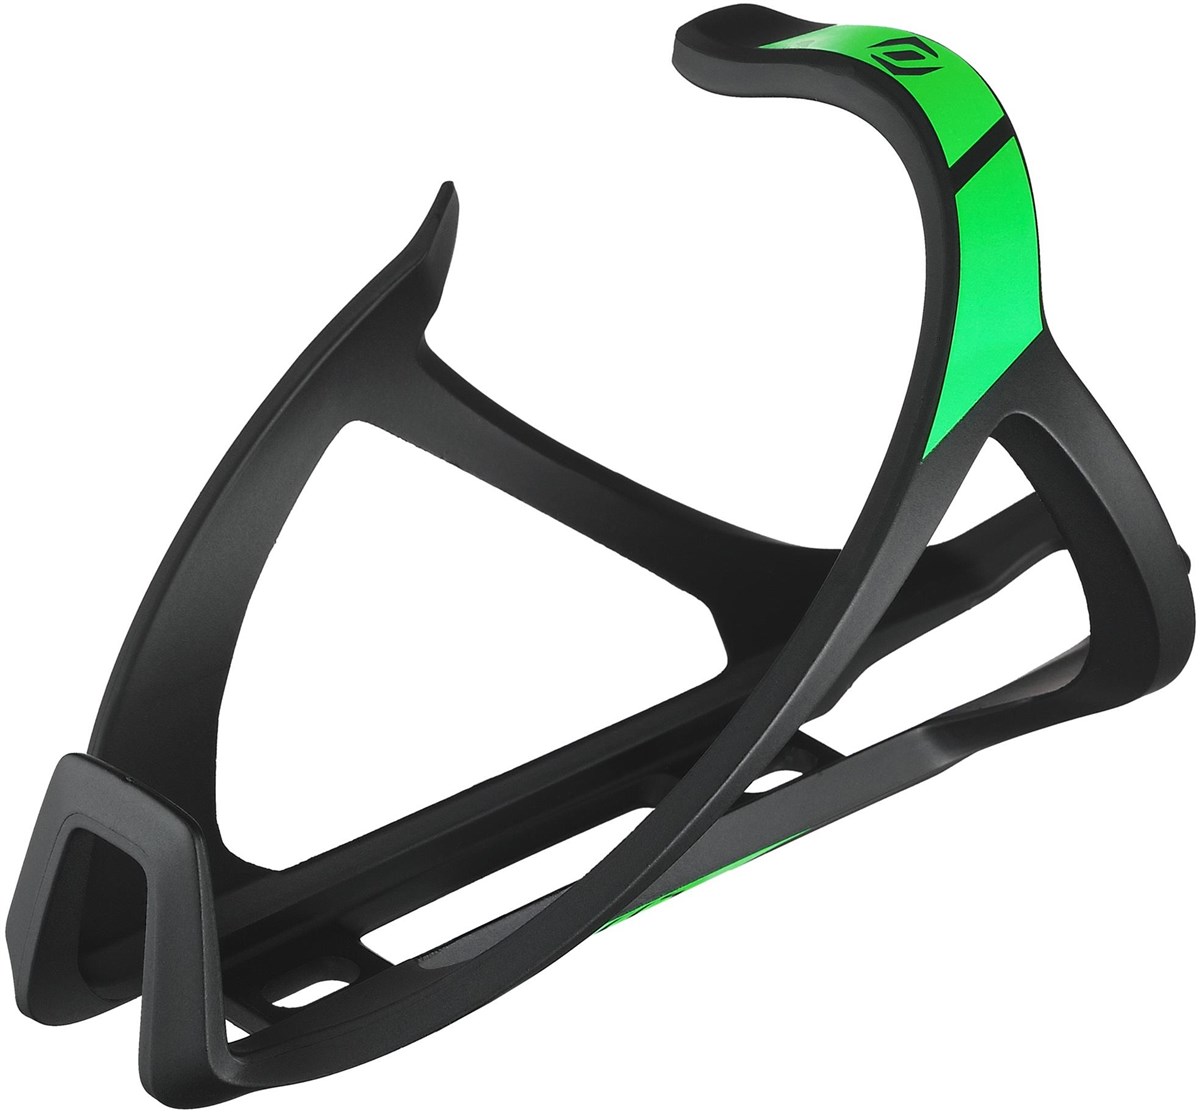 Syncros Tailor Cage 1.5 Left Bottle Cage